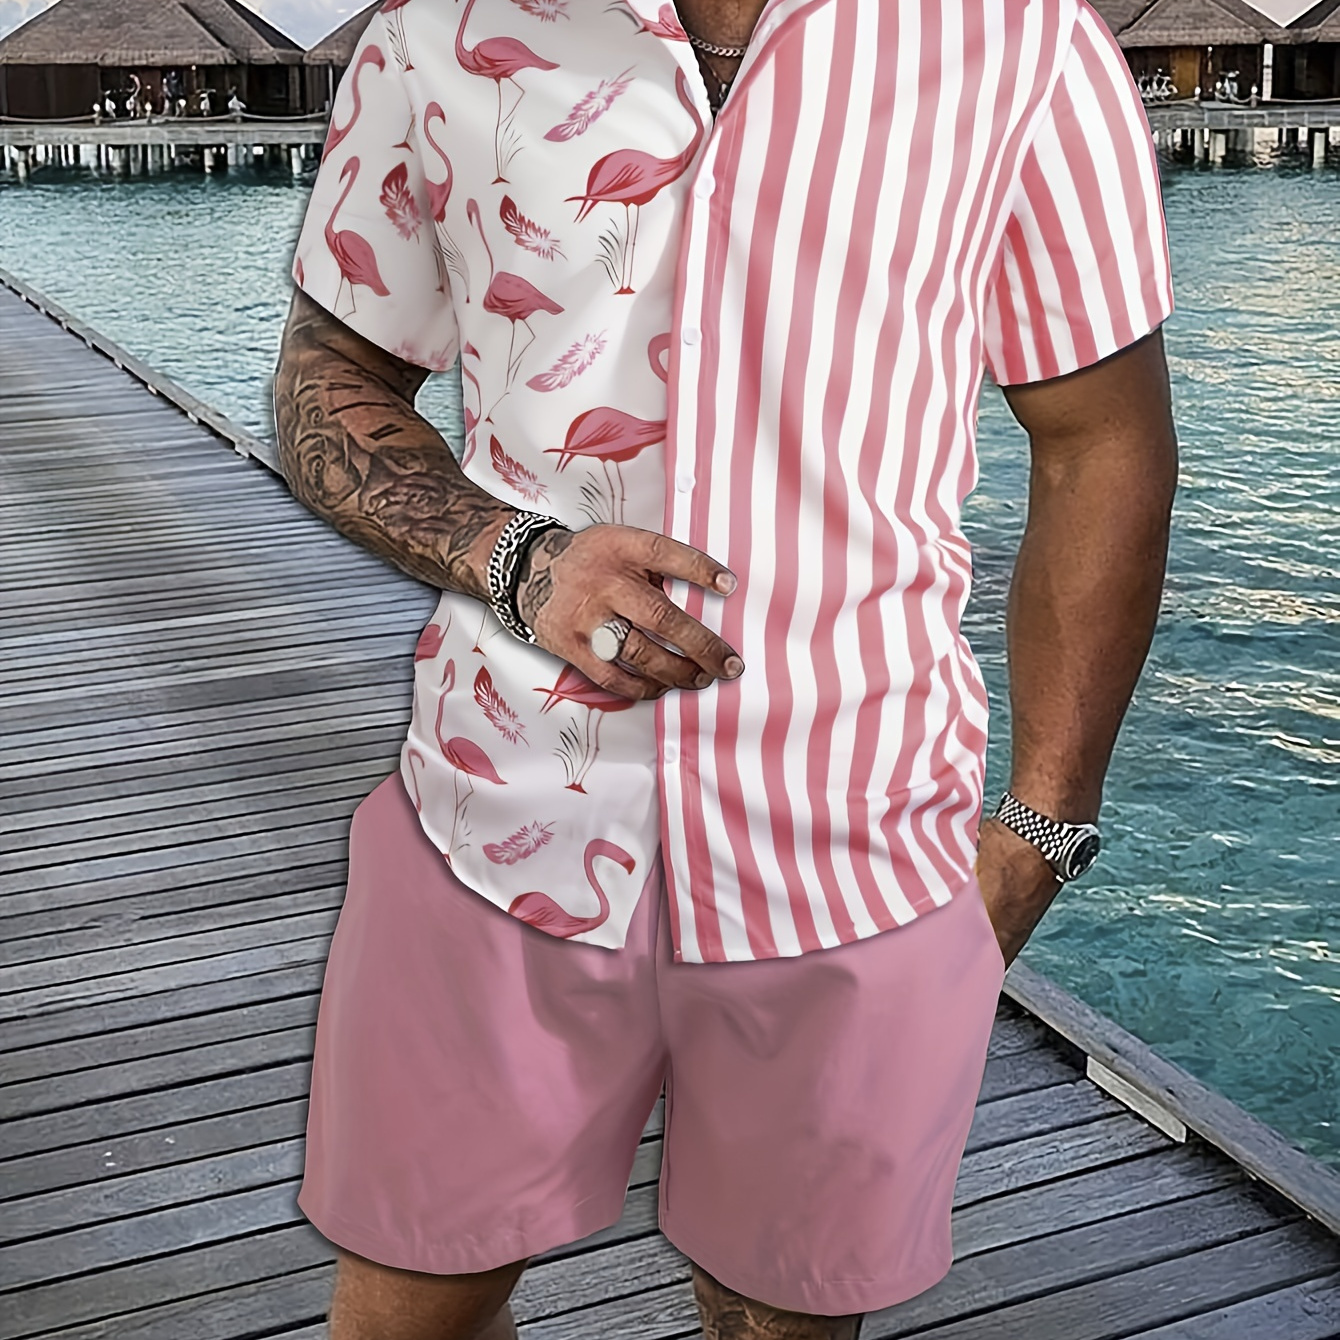 

Men's 2 Pieces Outfits, Flamingo And Strip Print Button Up Shirt And Drawstring Shorts Set For Summer